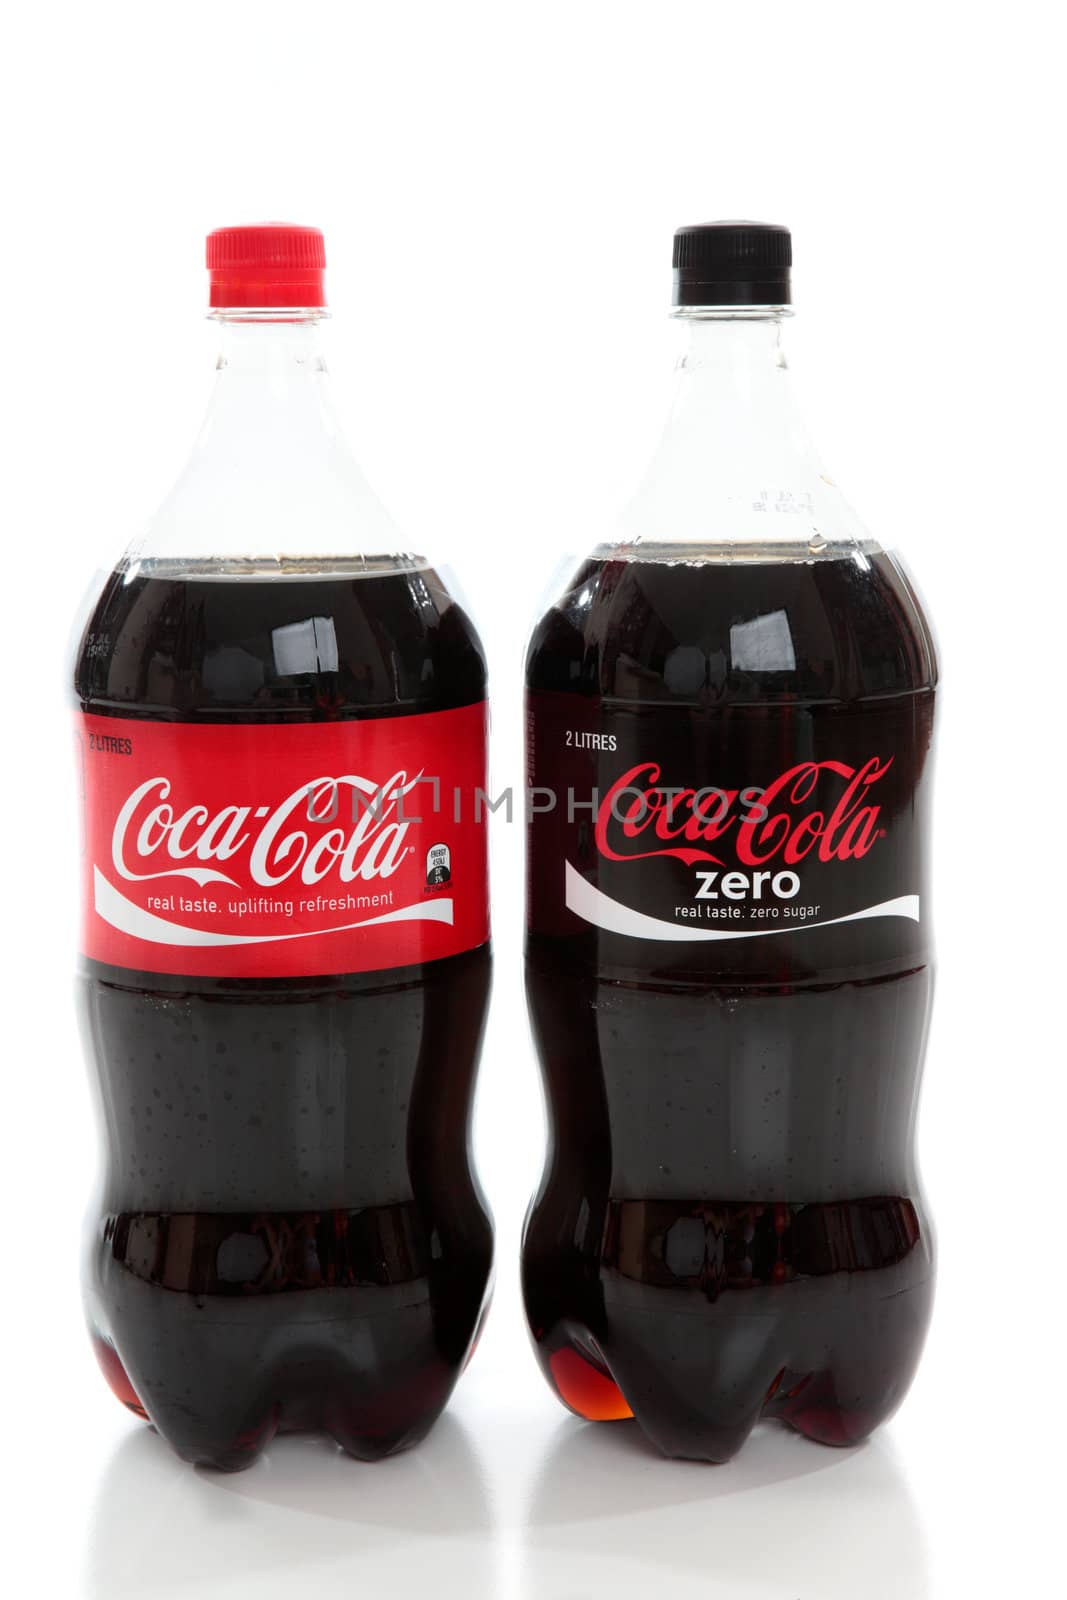 Bottles of Coca-Cola and Coke Zero, diet cola, caffeine flavoured carbonated drinks,soda drinks on a white background.